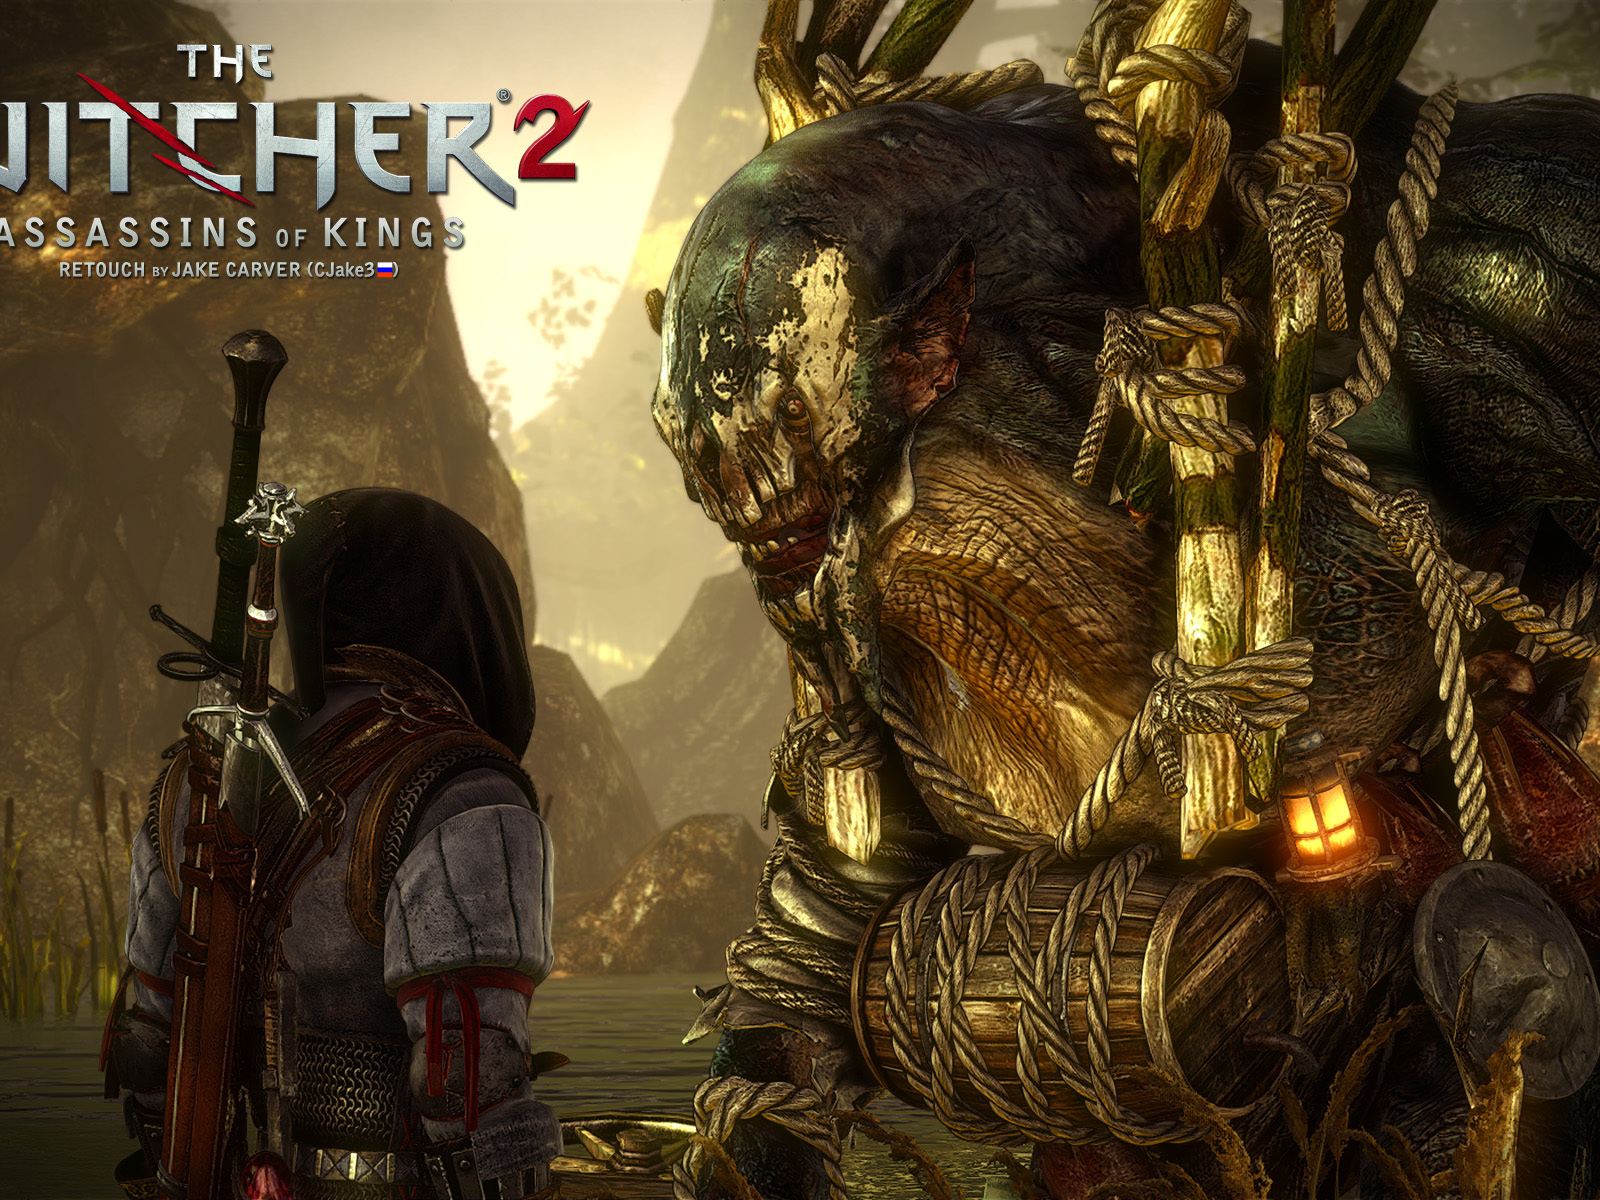 Start the game The Witcher 2